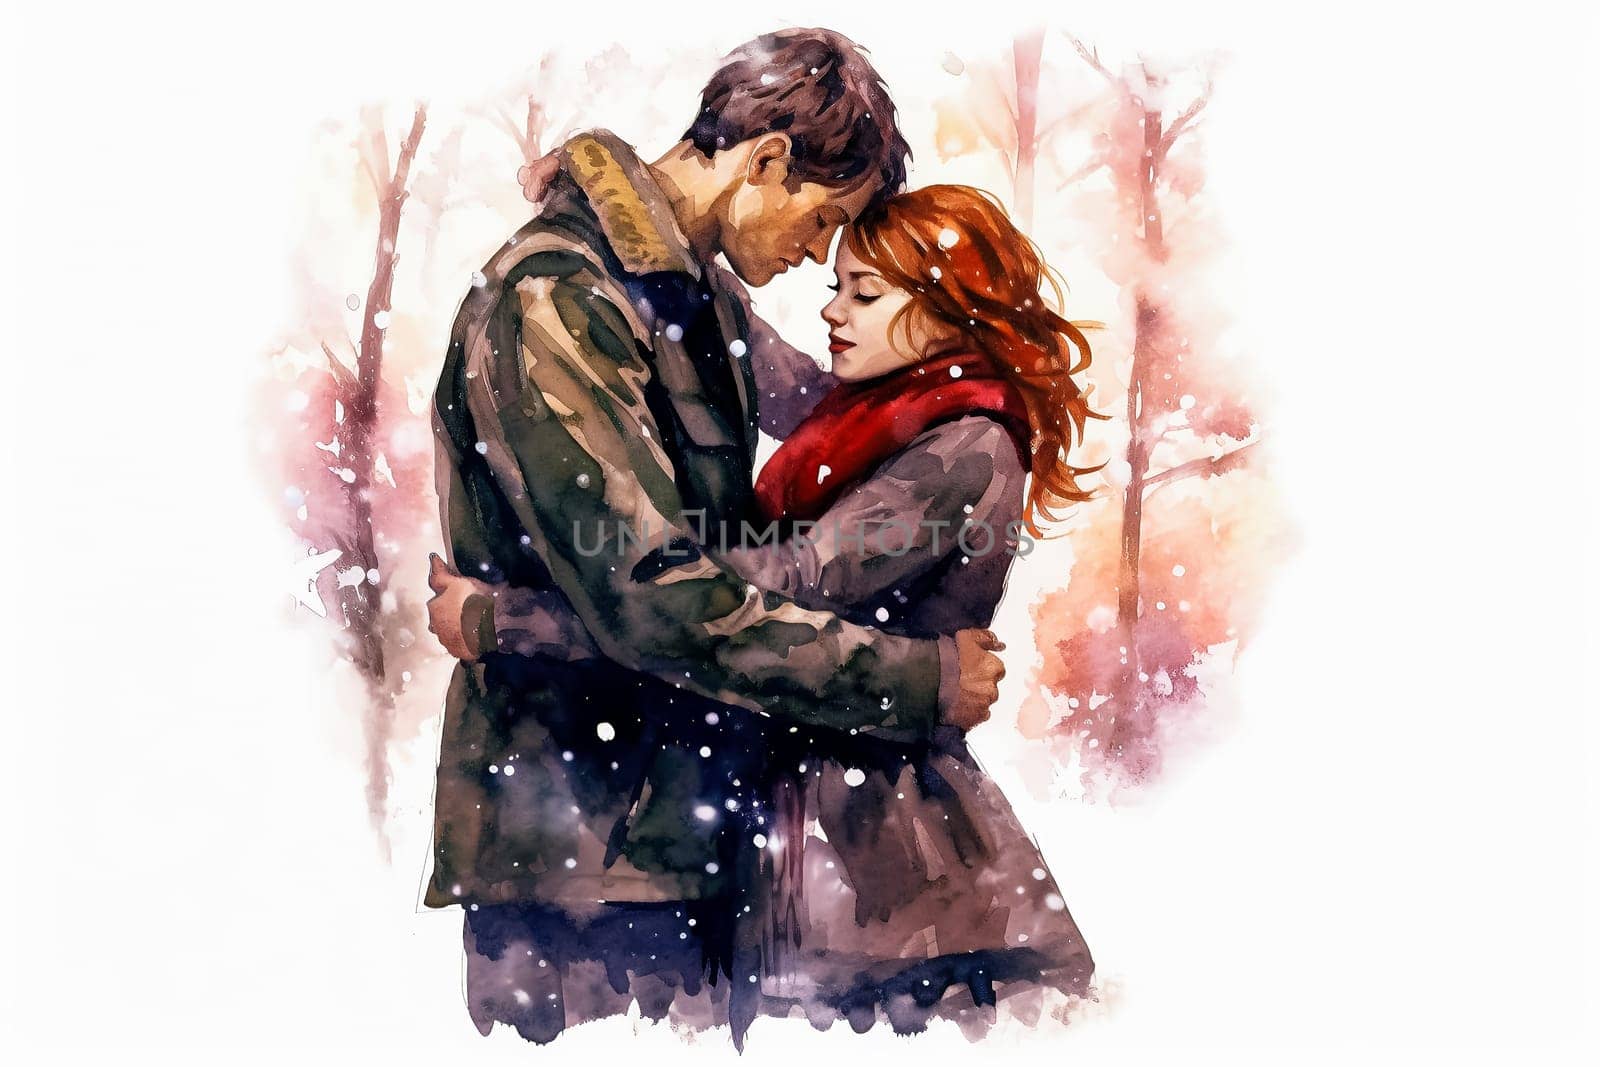 a watercolor illustration of a couple in love against a festive New Years background. by Alla_Morozova93